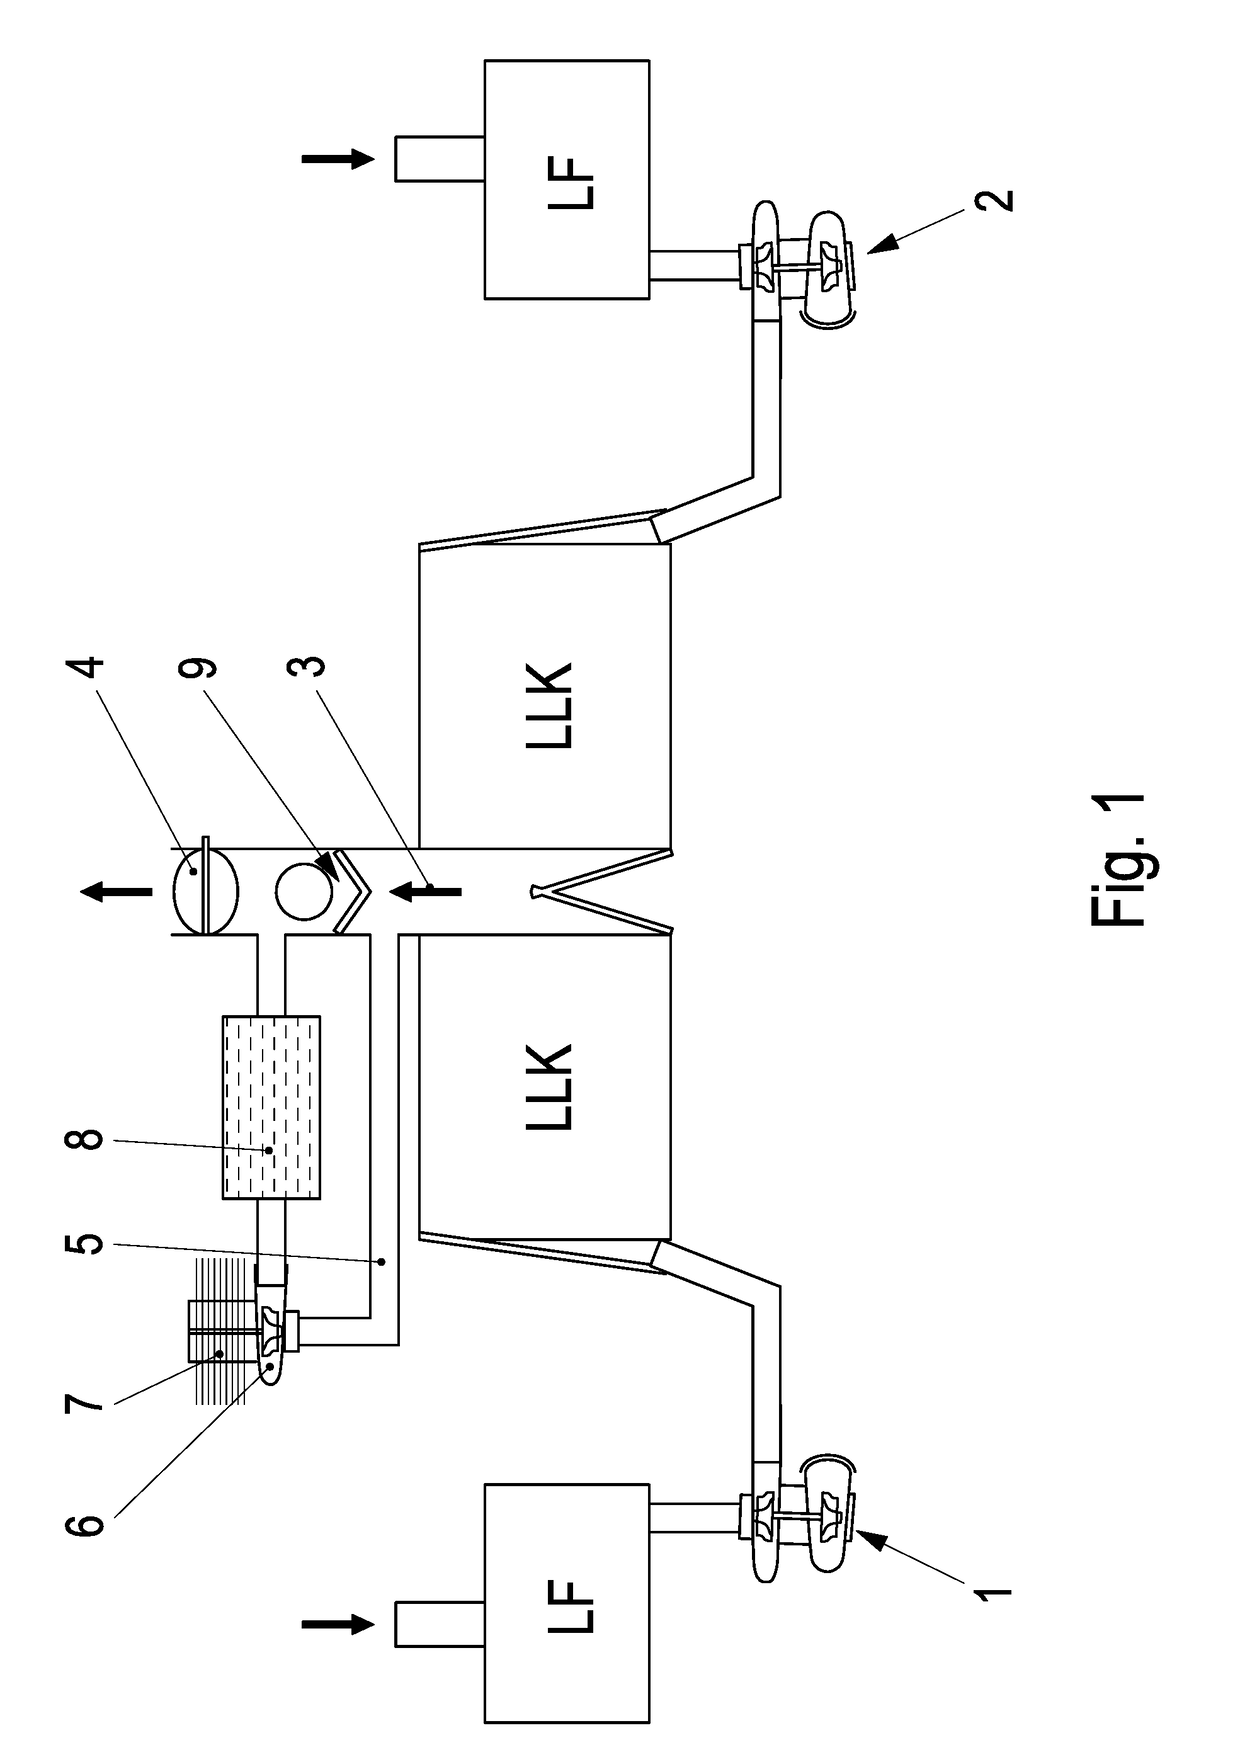 Supercharging device for an internal combustion engine